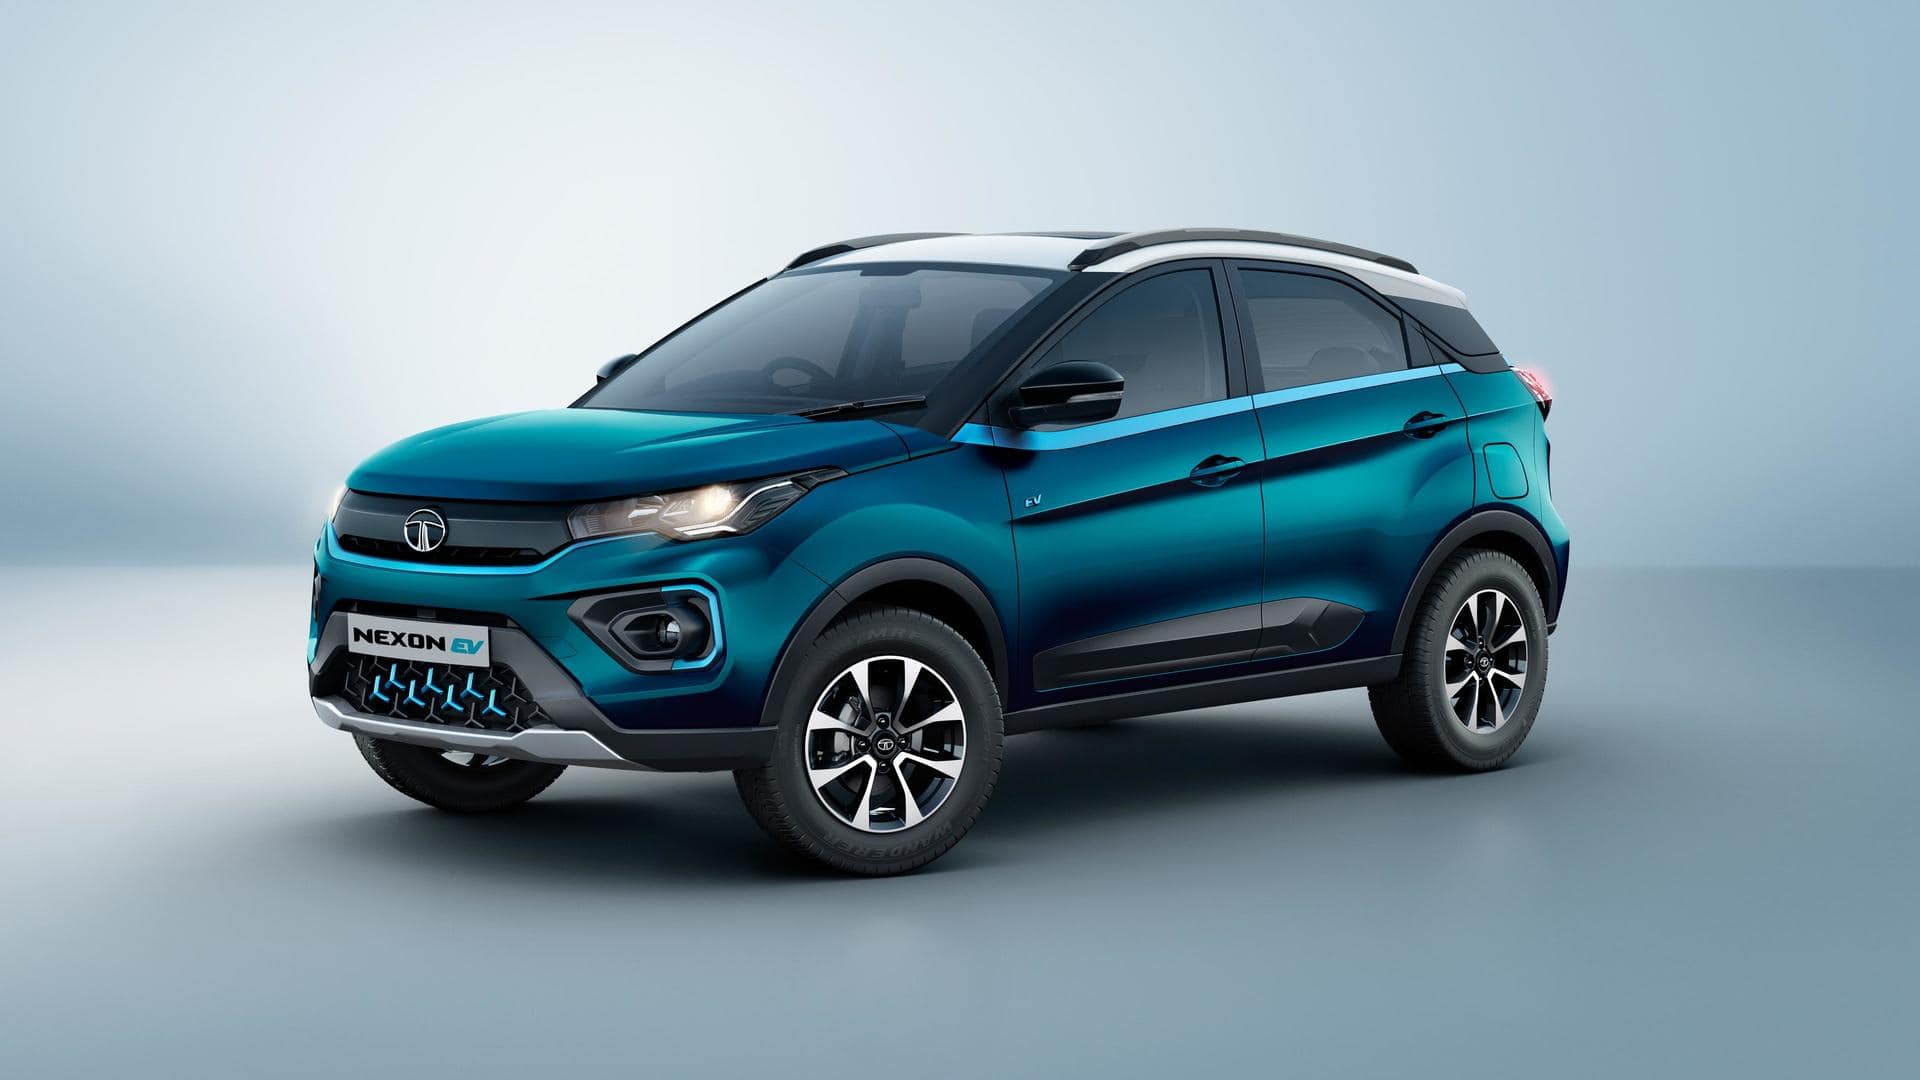 Citroen to MG Motor: Top EVs under Rs. 25 lakh